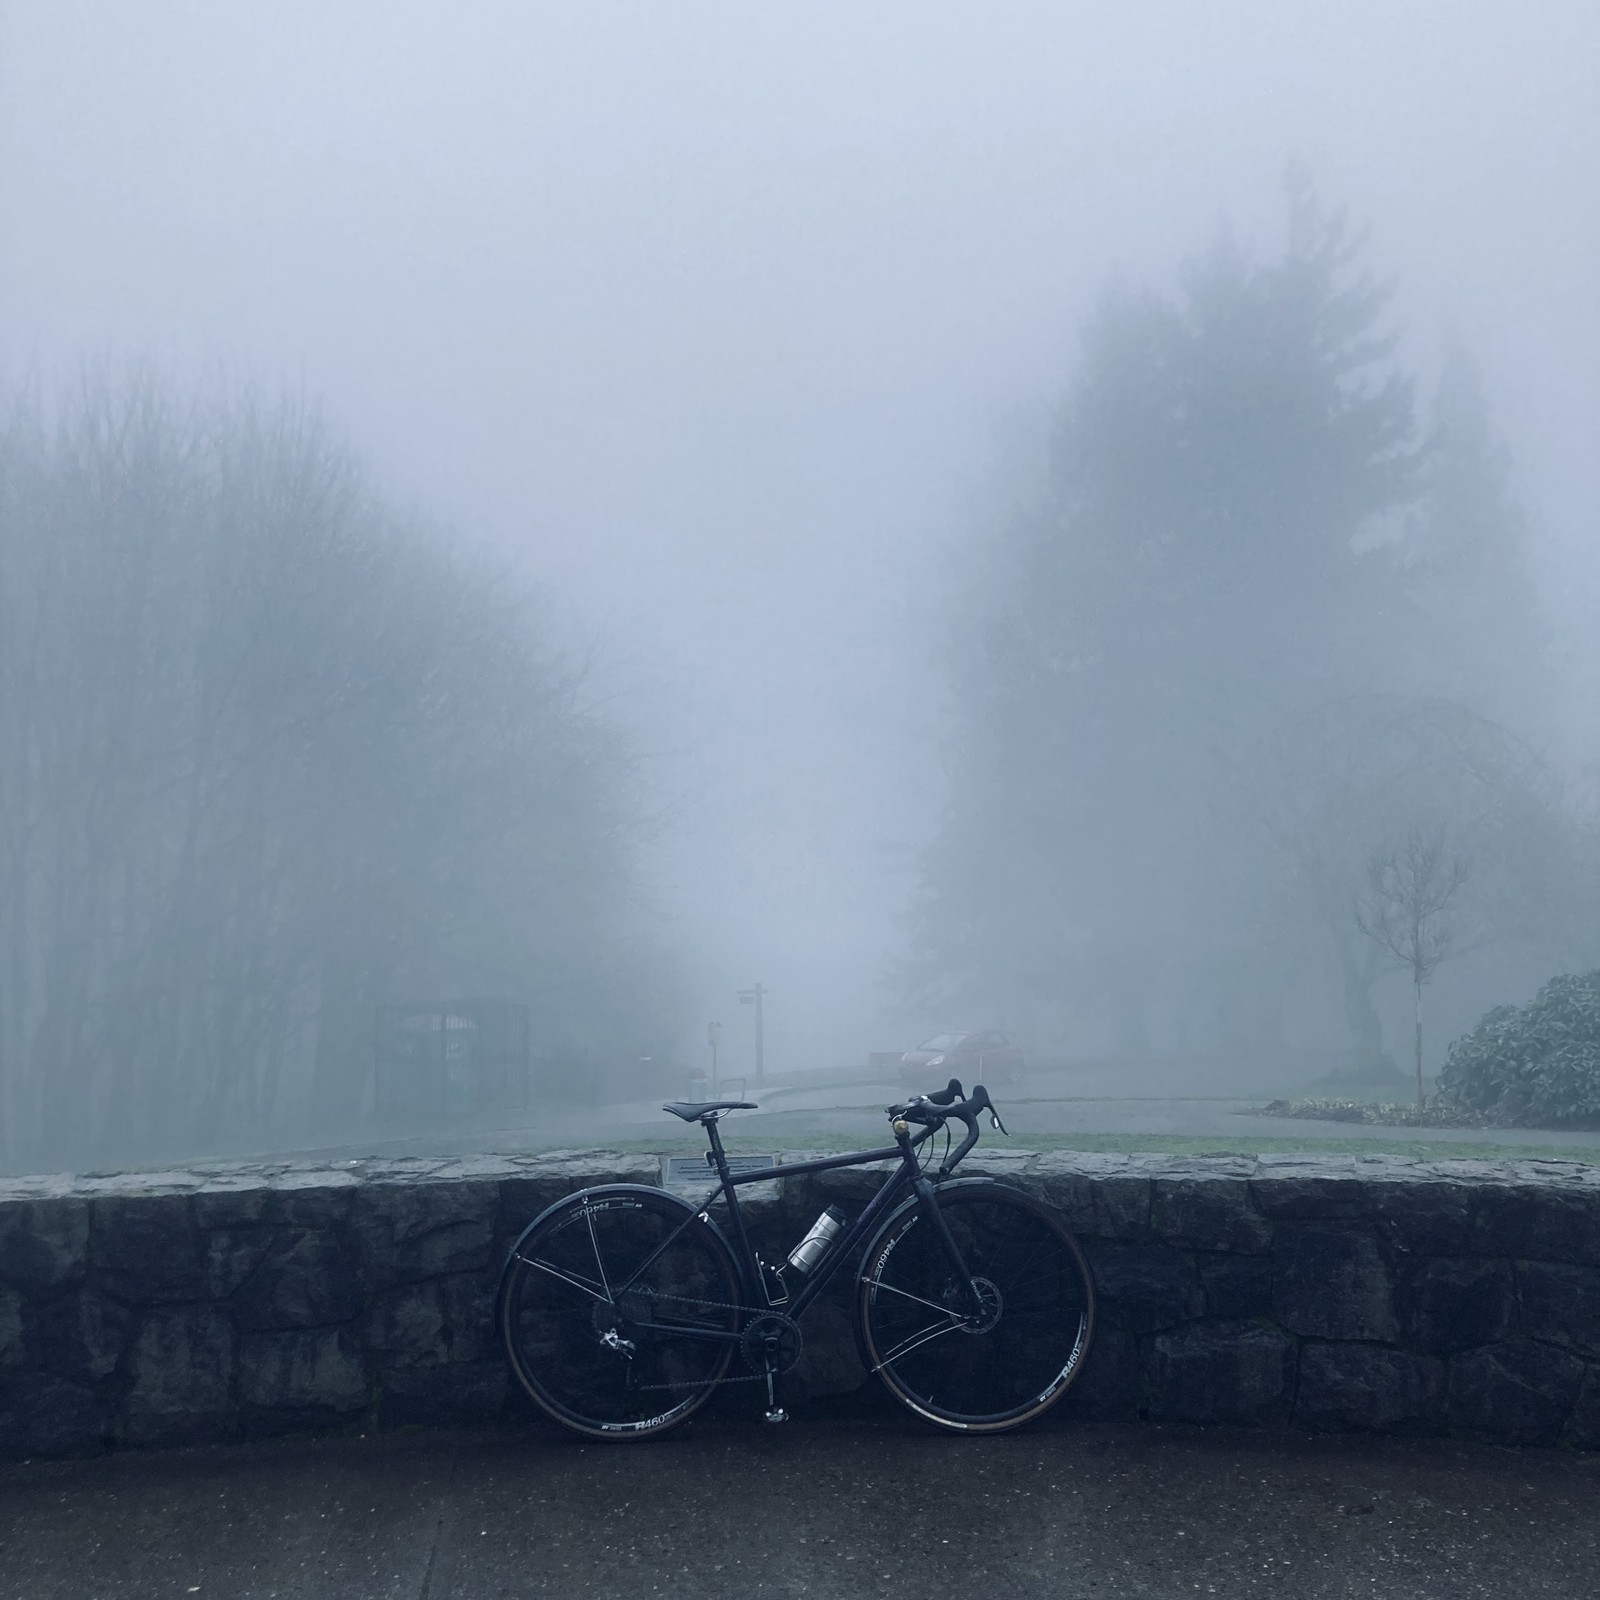 View from Council Crest Park toward Mt. Hood, which is very extremely not visible. A heavy fog limits visibility to perhaps 100'. A line of Douglas Firs at that distance are mere silhouettes. In the foreground a bicycle leans against the stone retaining wall. Every surface is damp, the air is stagnant and cool.